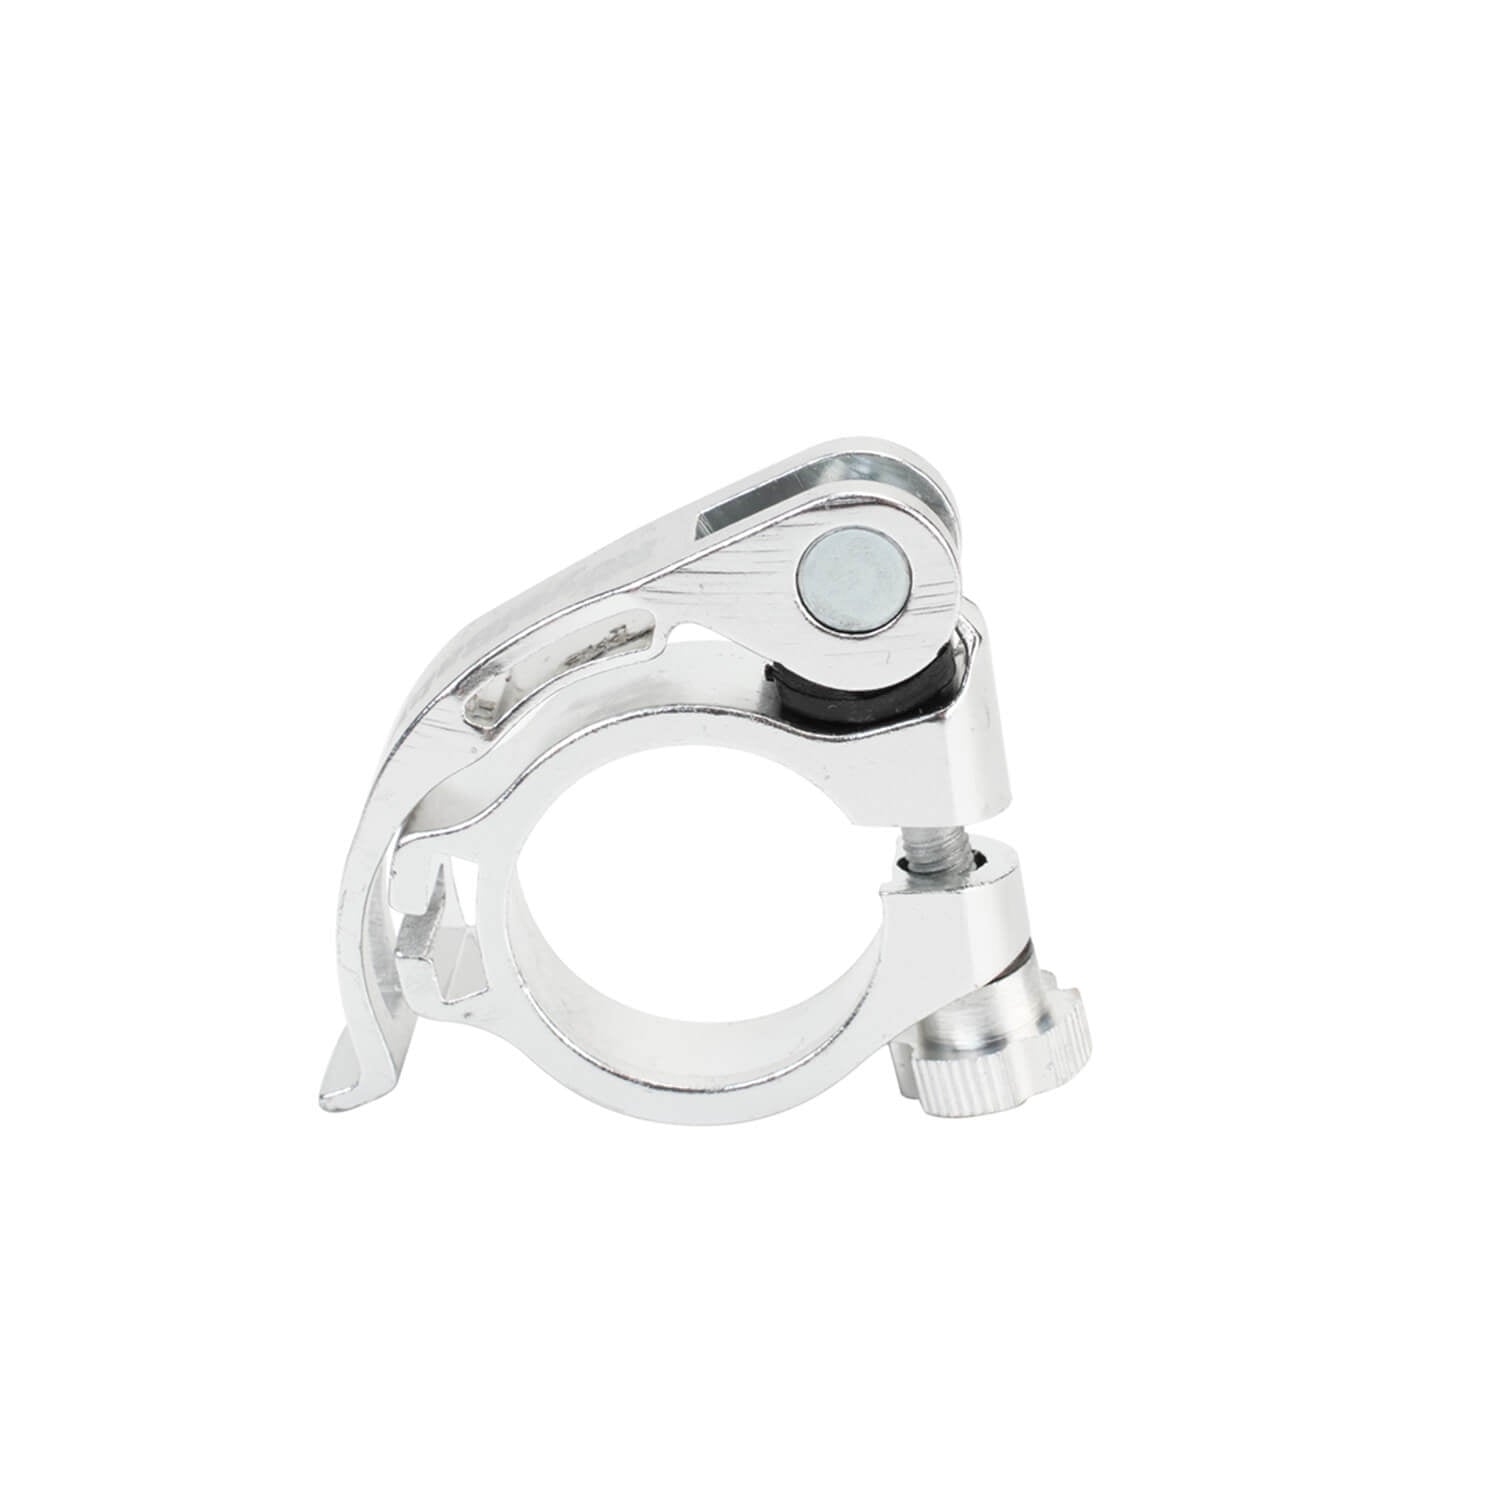 RoyalBaby Accessories Quick Release Seat Clamp